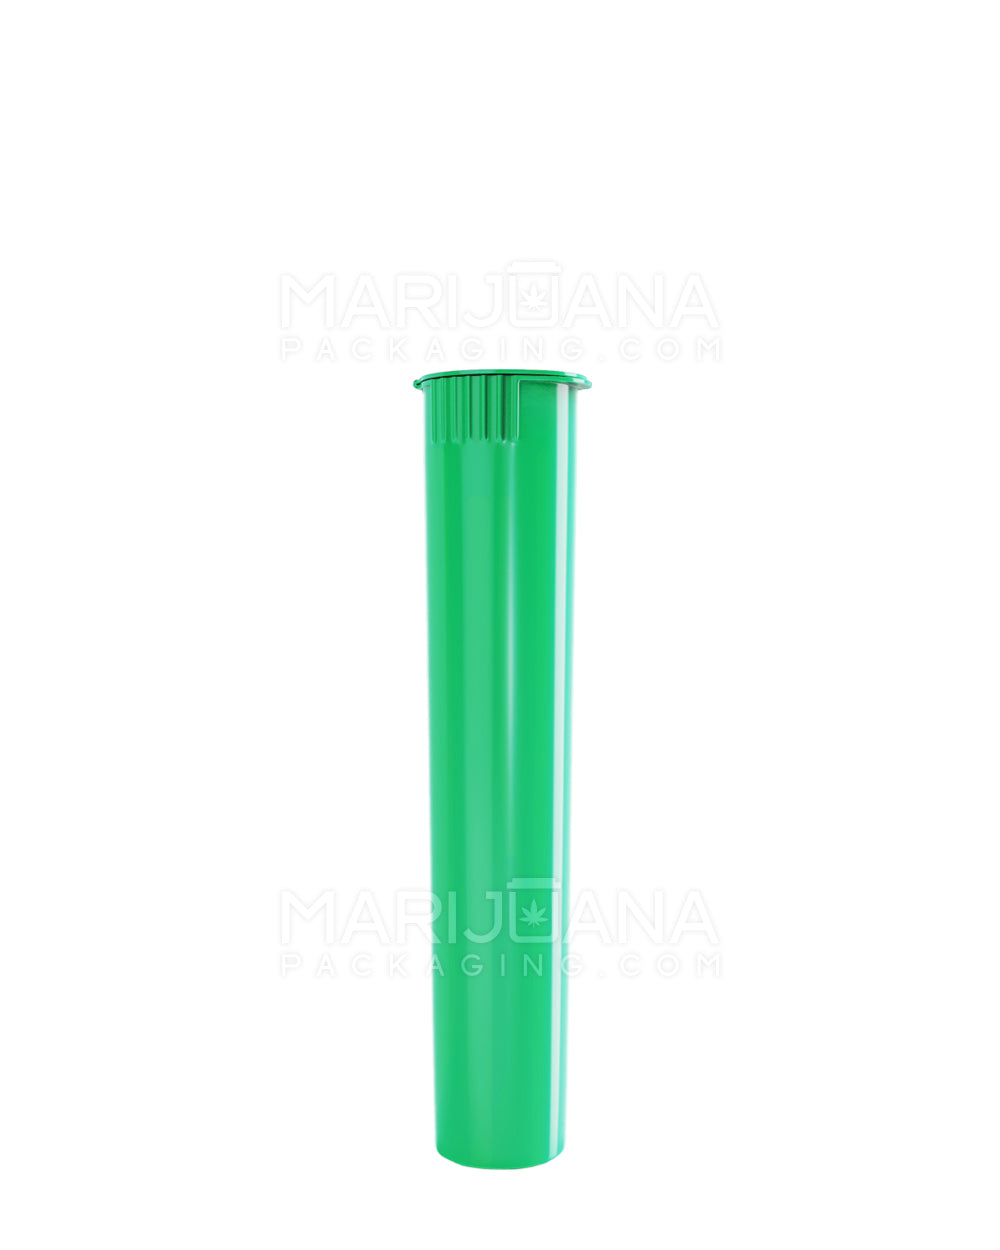 Child Resistant | Pop Top Opaque Plastic Pre-Roll Tubes | 95mm - Green - 1000 Count - 3